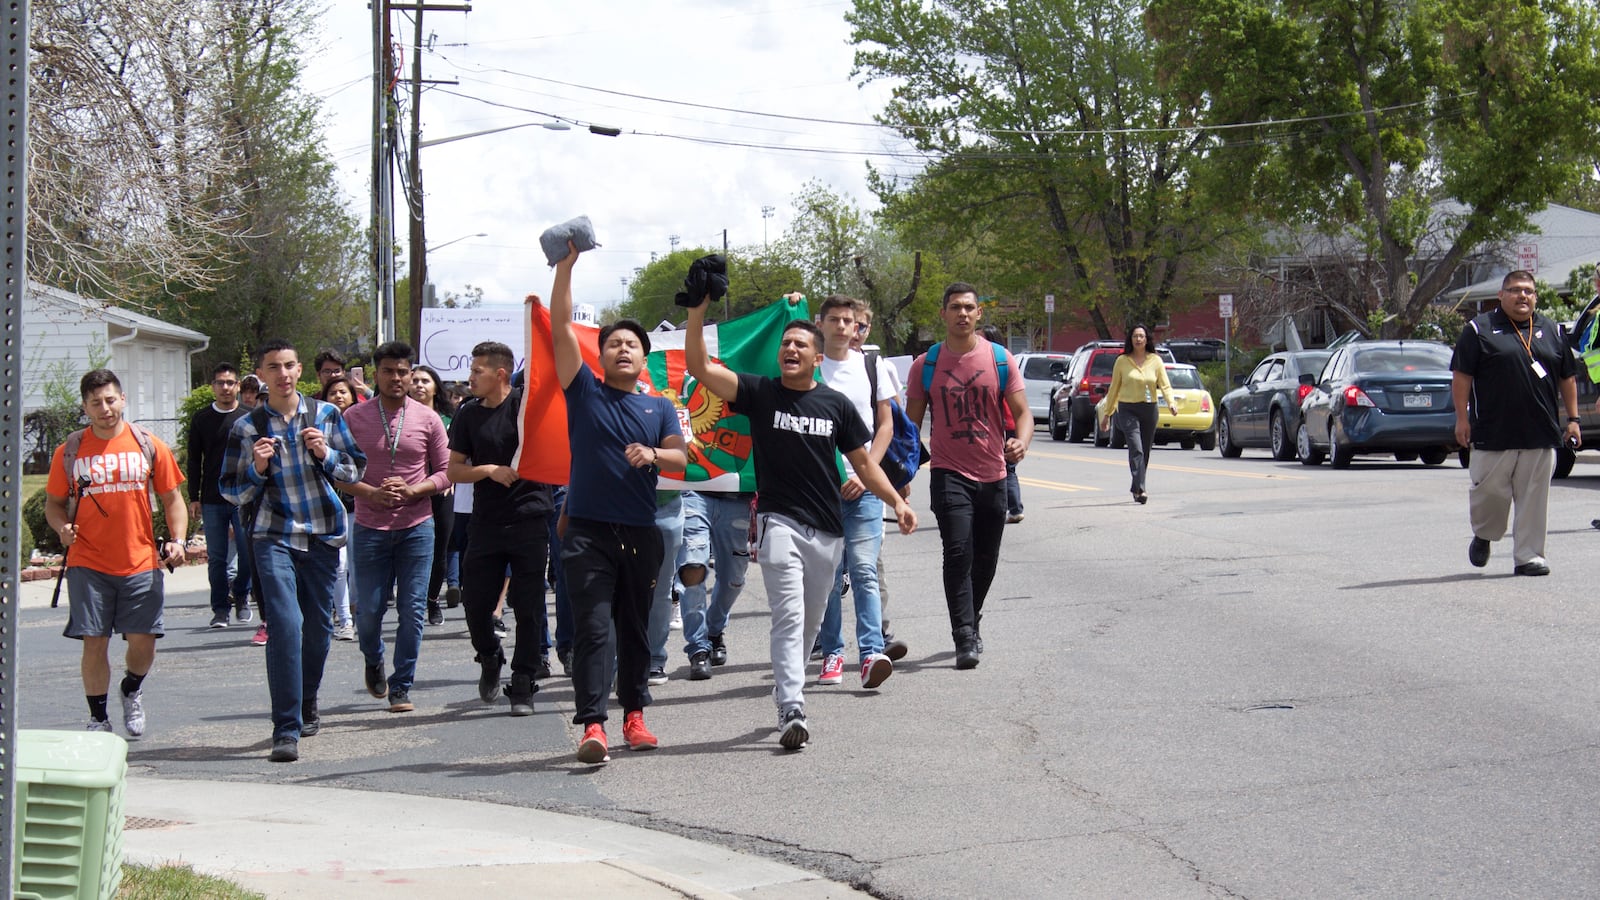 Students from Adams City High School march toward the district building April 25, 2017. (Photo by Yesenia Robles, Chalkbeat)